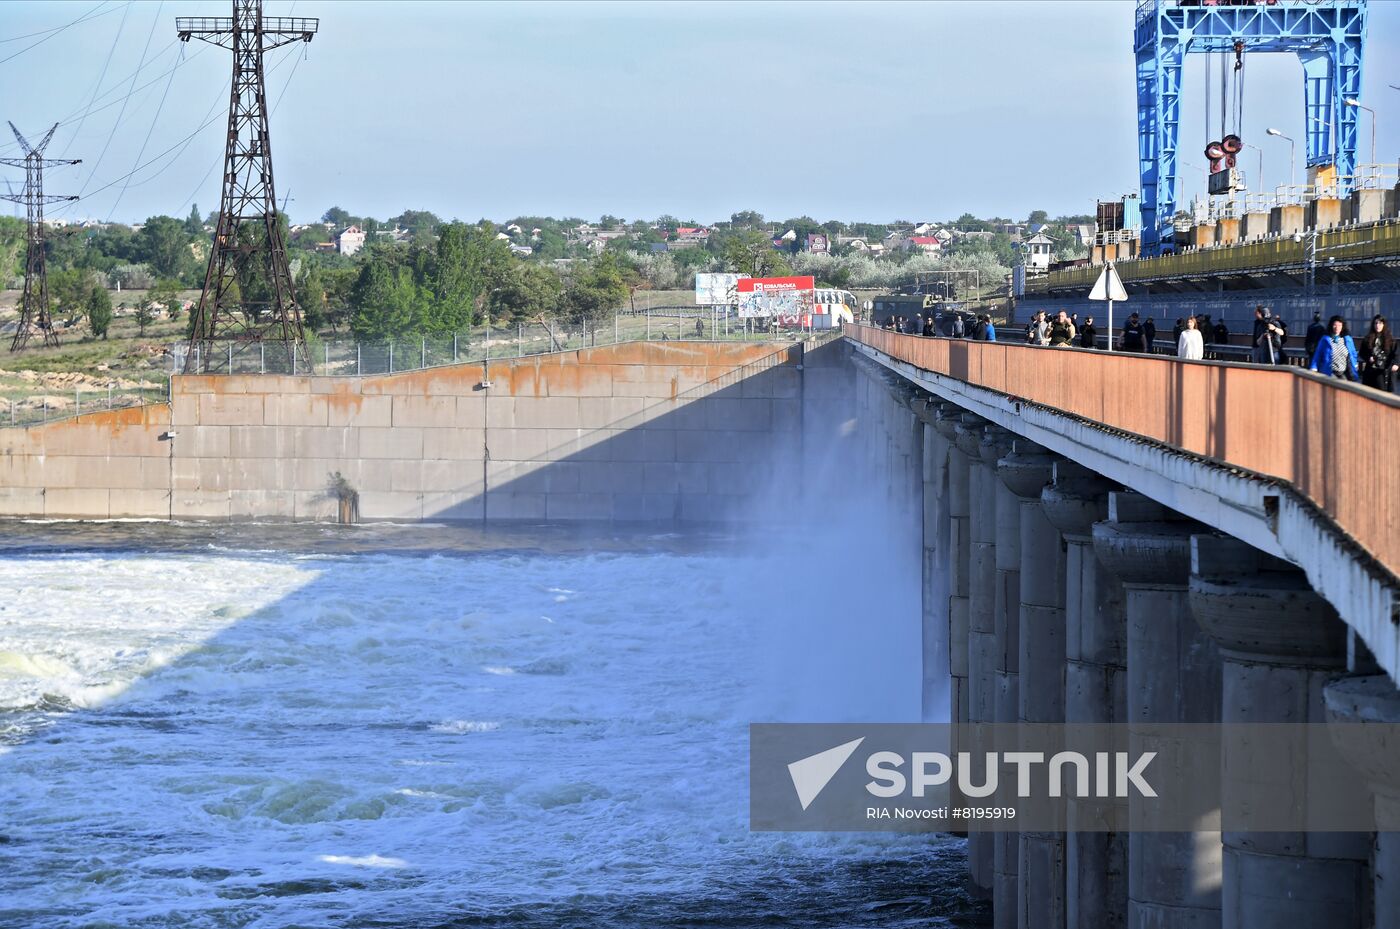 Ukraine Russia Military Operation Hydroelectric Station